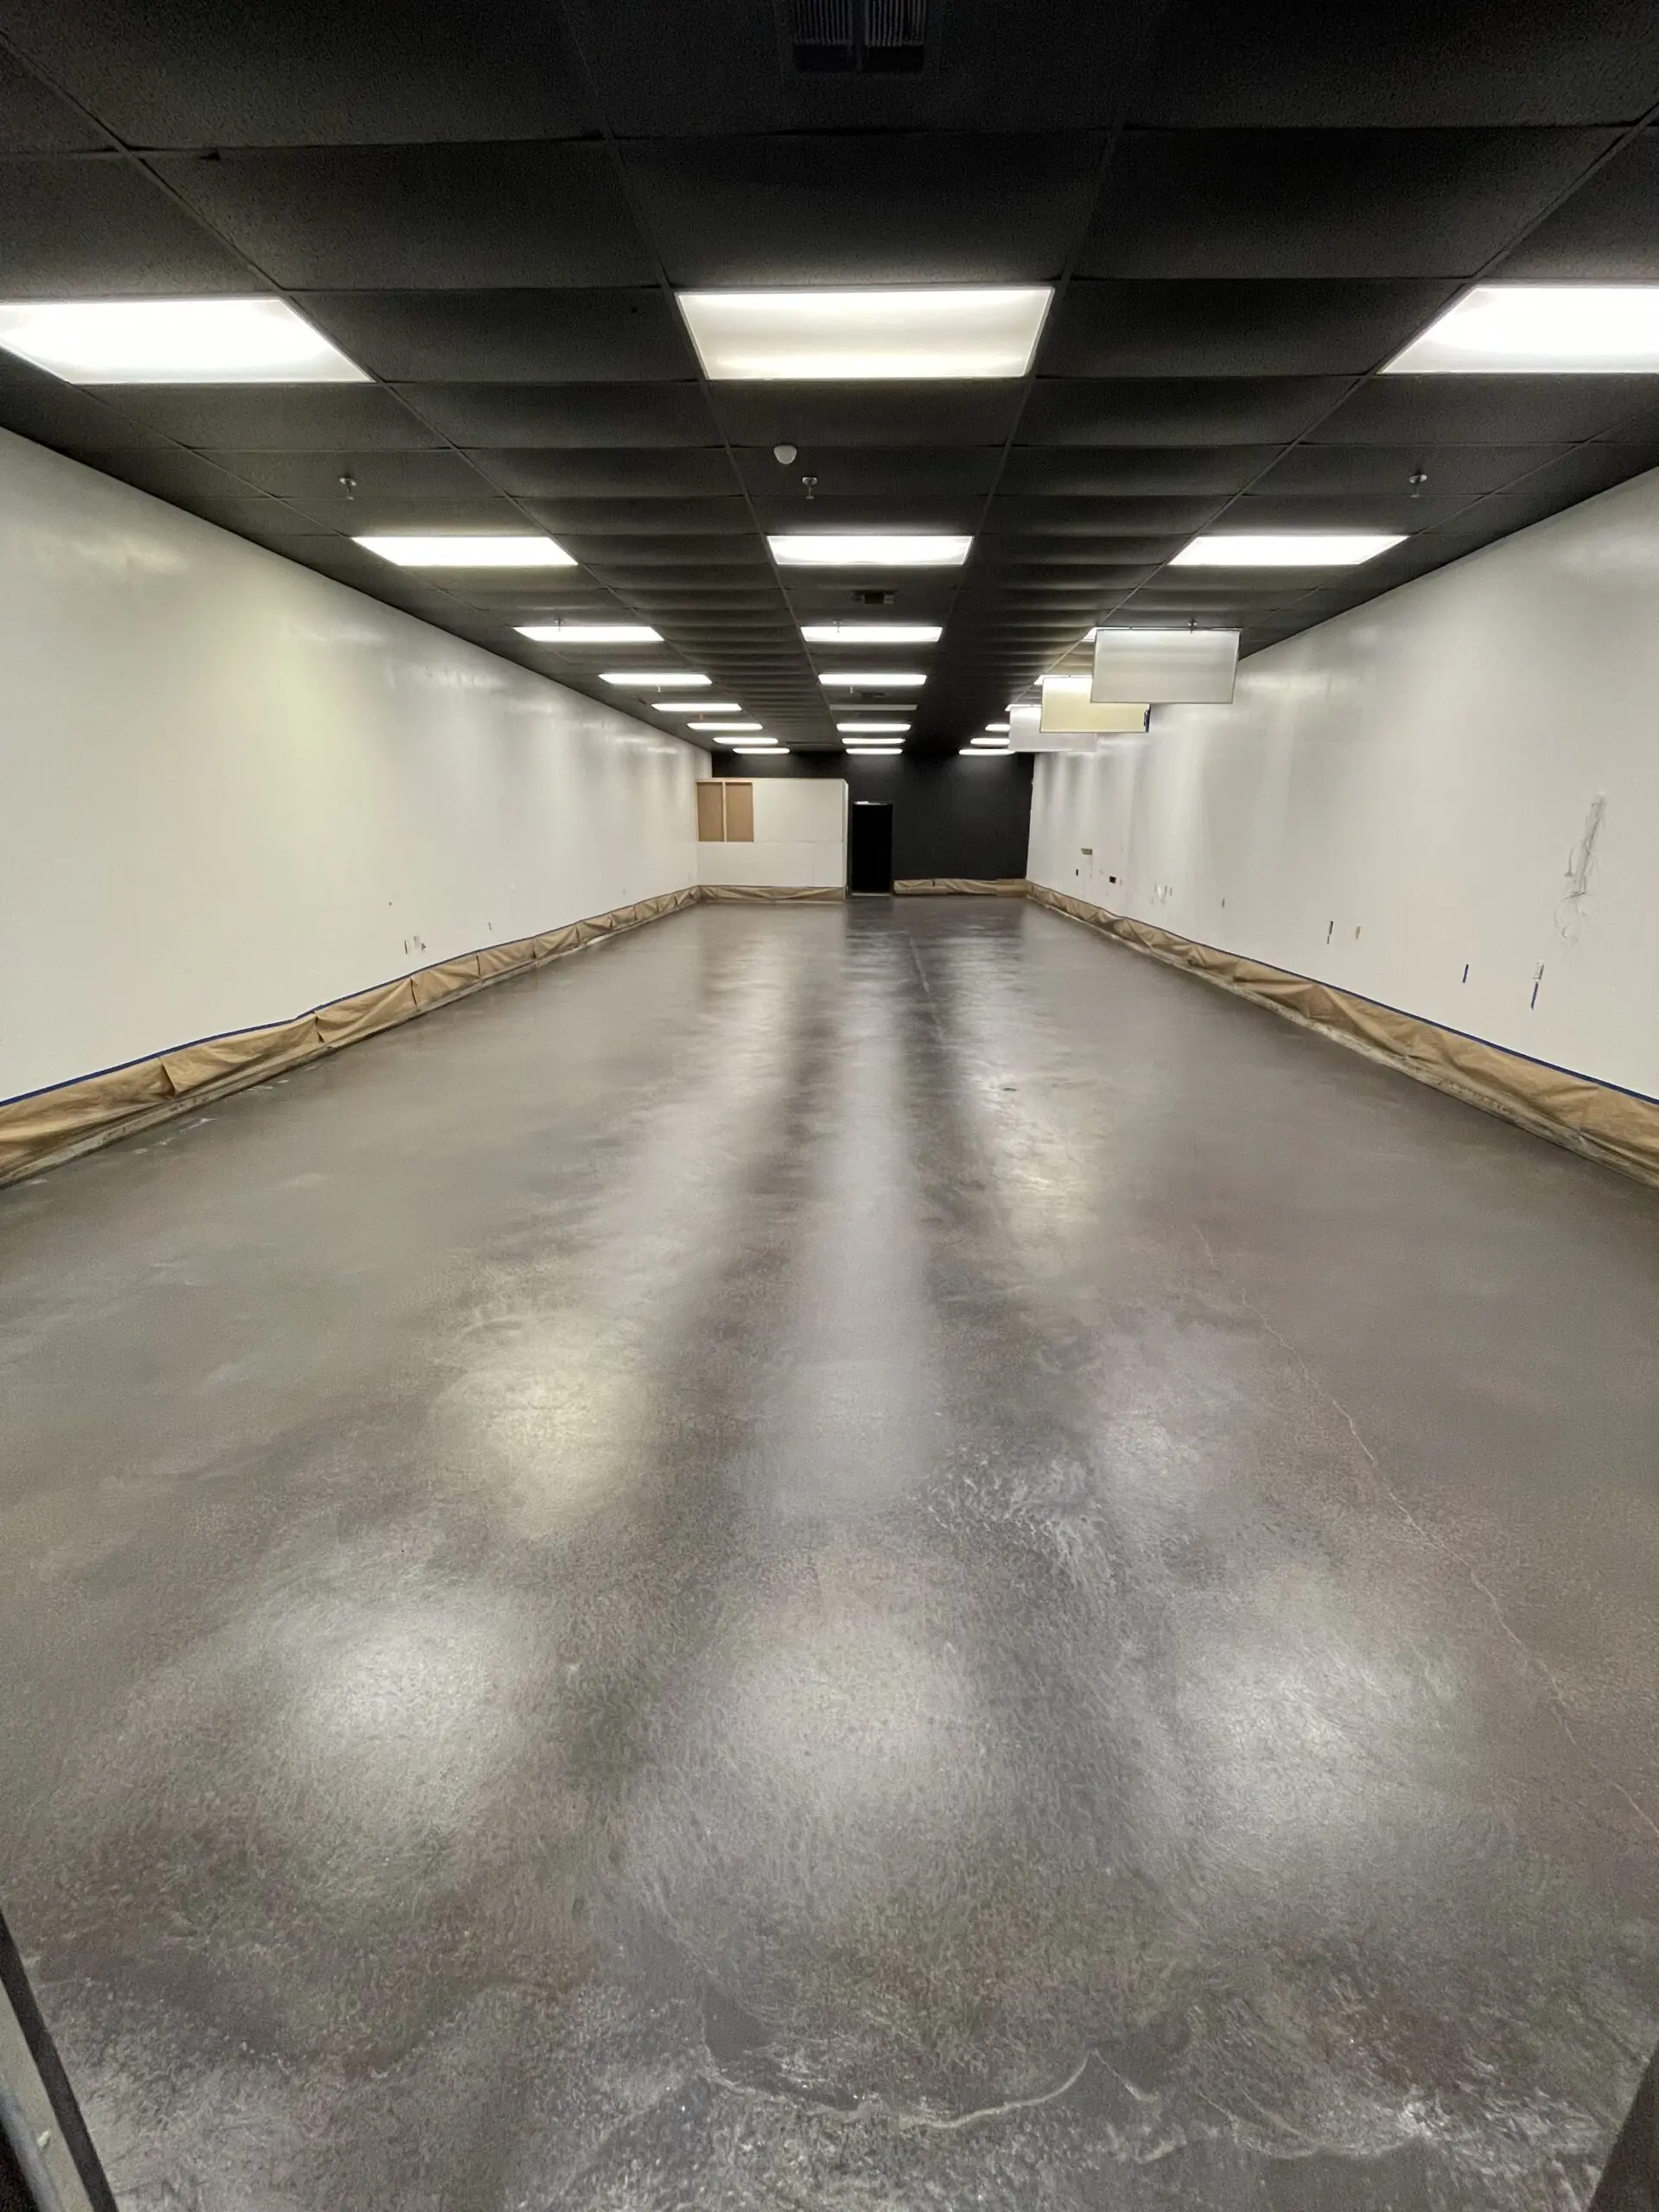 Image showing the floor after the application of the second coat of Charcoal Acquatint, as it awaits curing before the application of ProWax Polish